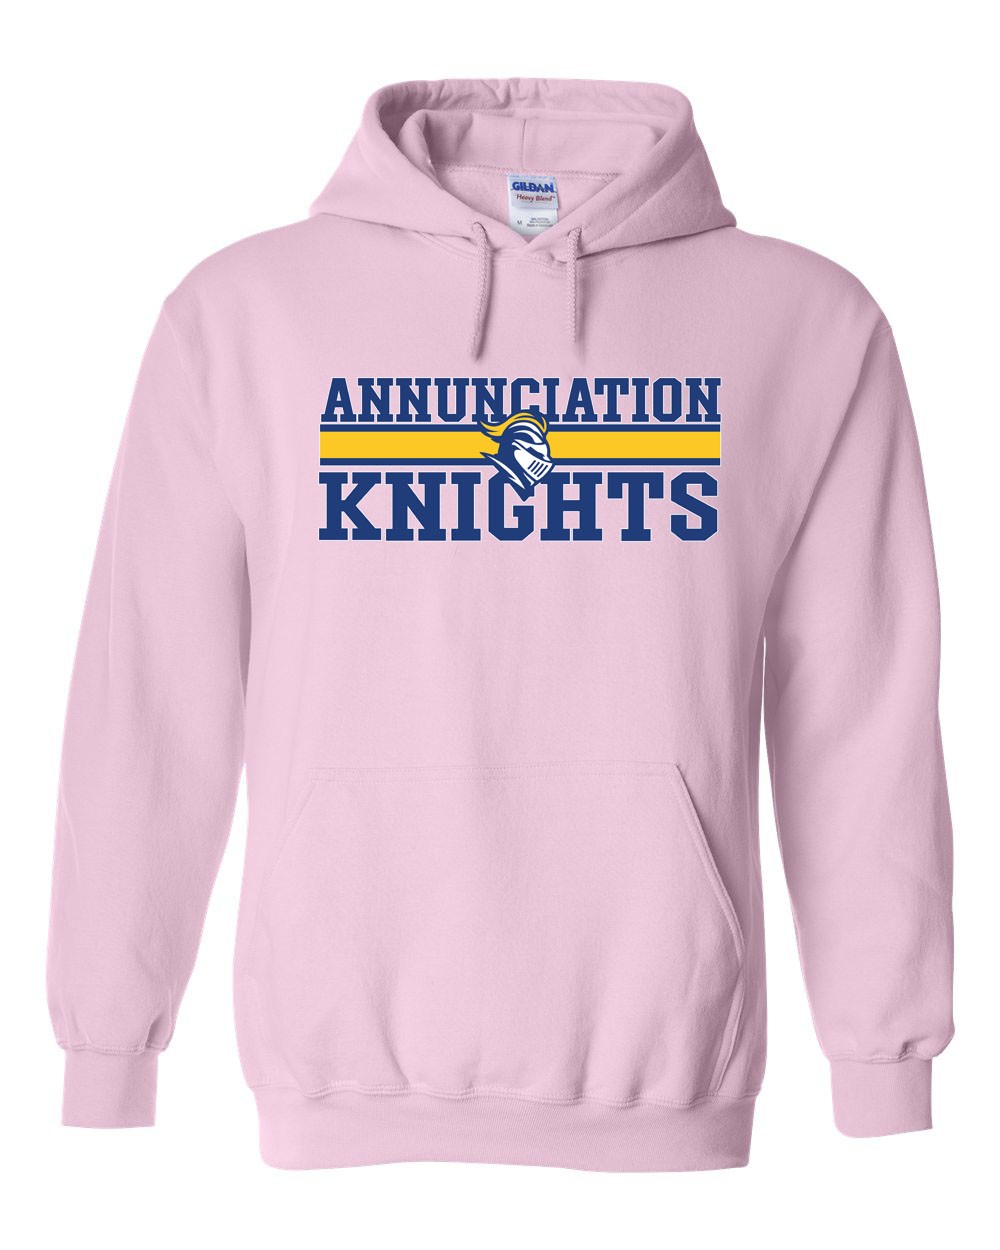 ANN Spirit Pullover Hoodie w/ Annunciation Knights Logo - Please Allow 2-3 Weeks for Delivery